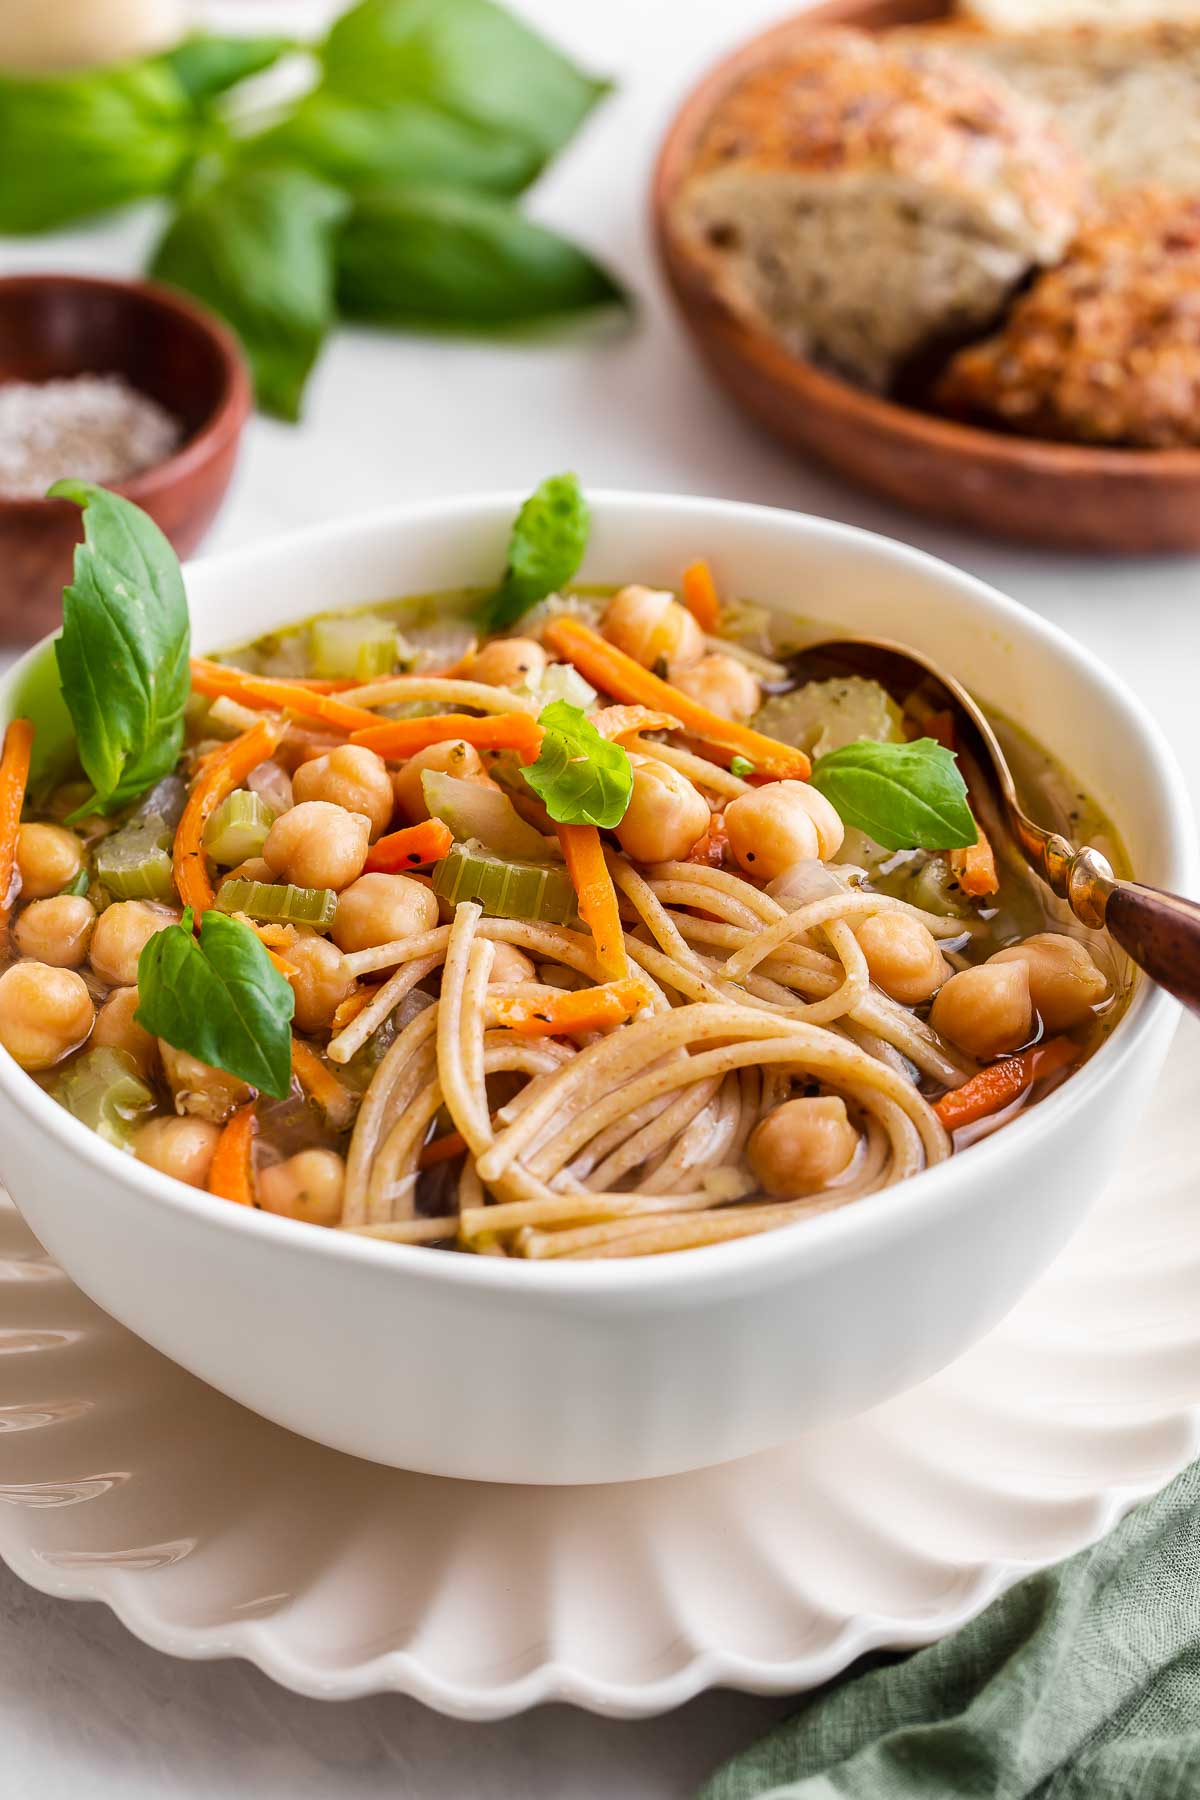 A bowl of noodle soup with chickpeas, grated carrots and fresh basil leaves.